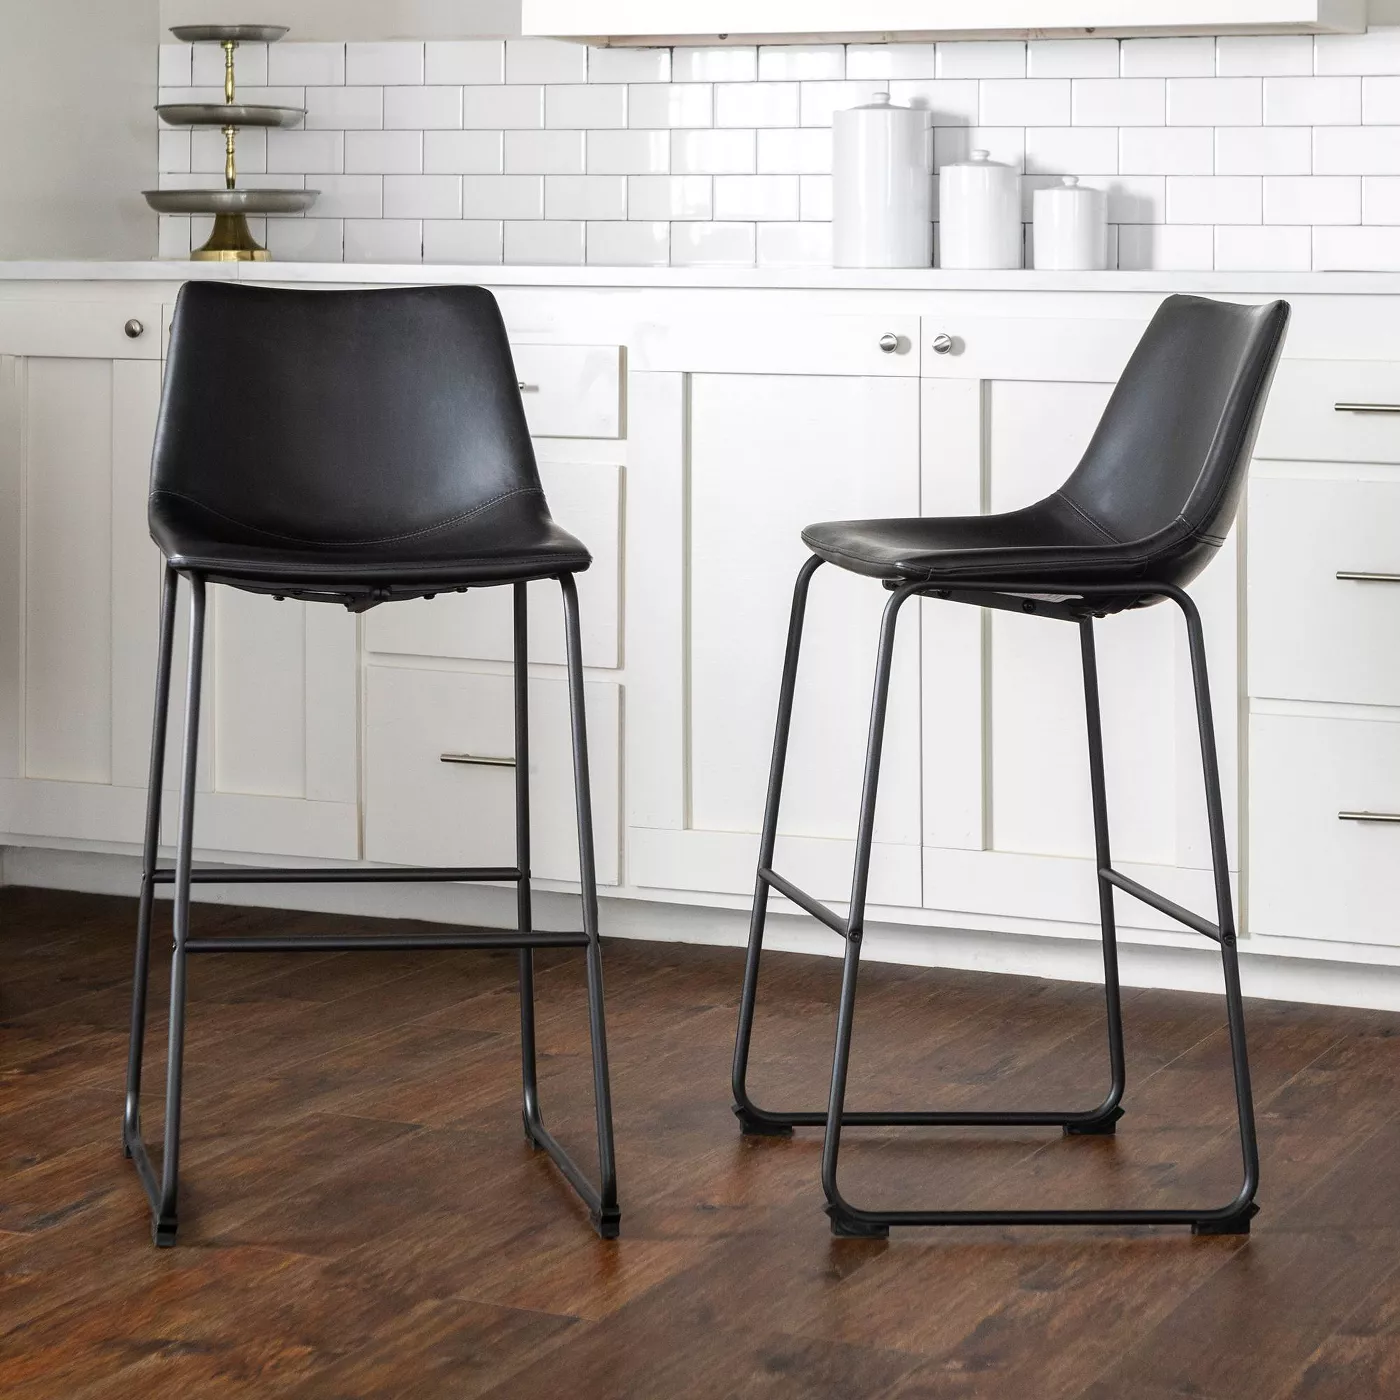 Set of 2 Laslo Modern 30" Faux Leather Low Back Barstools - Saracina Home - image 2 of 11